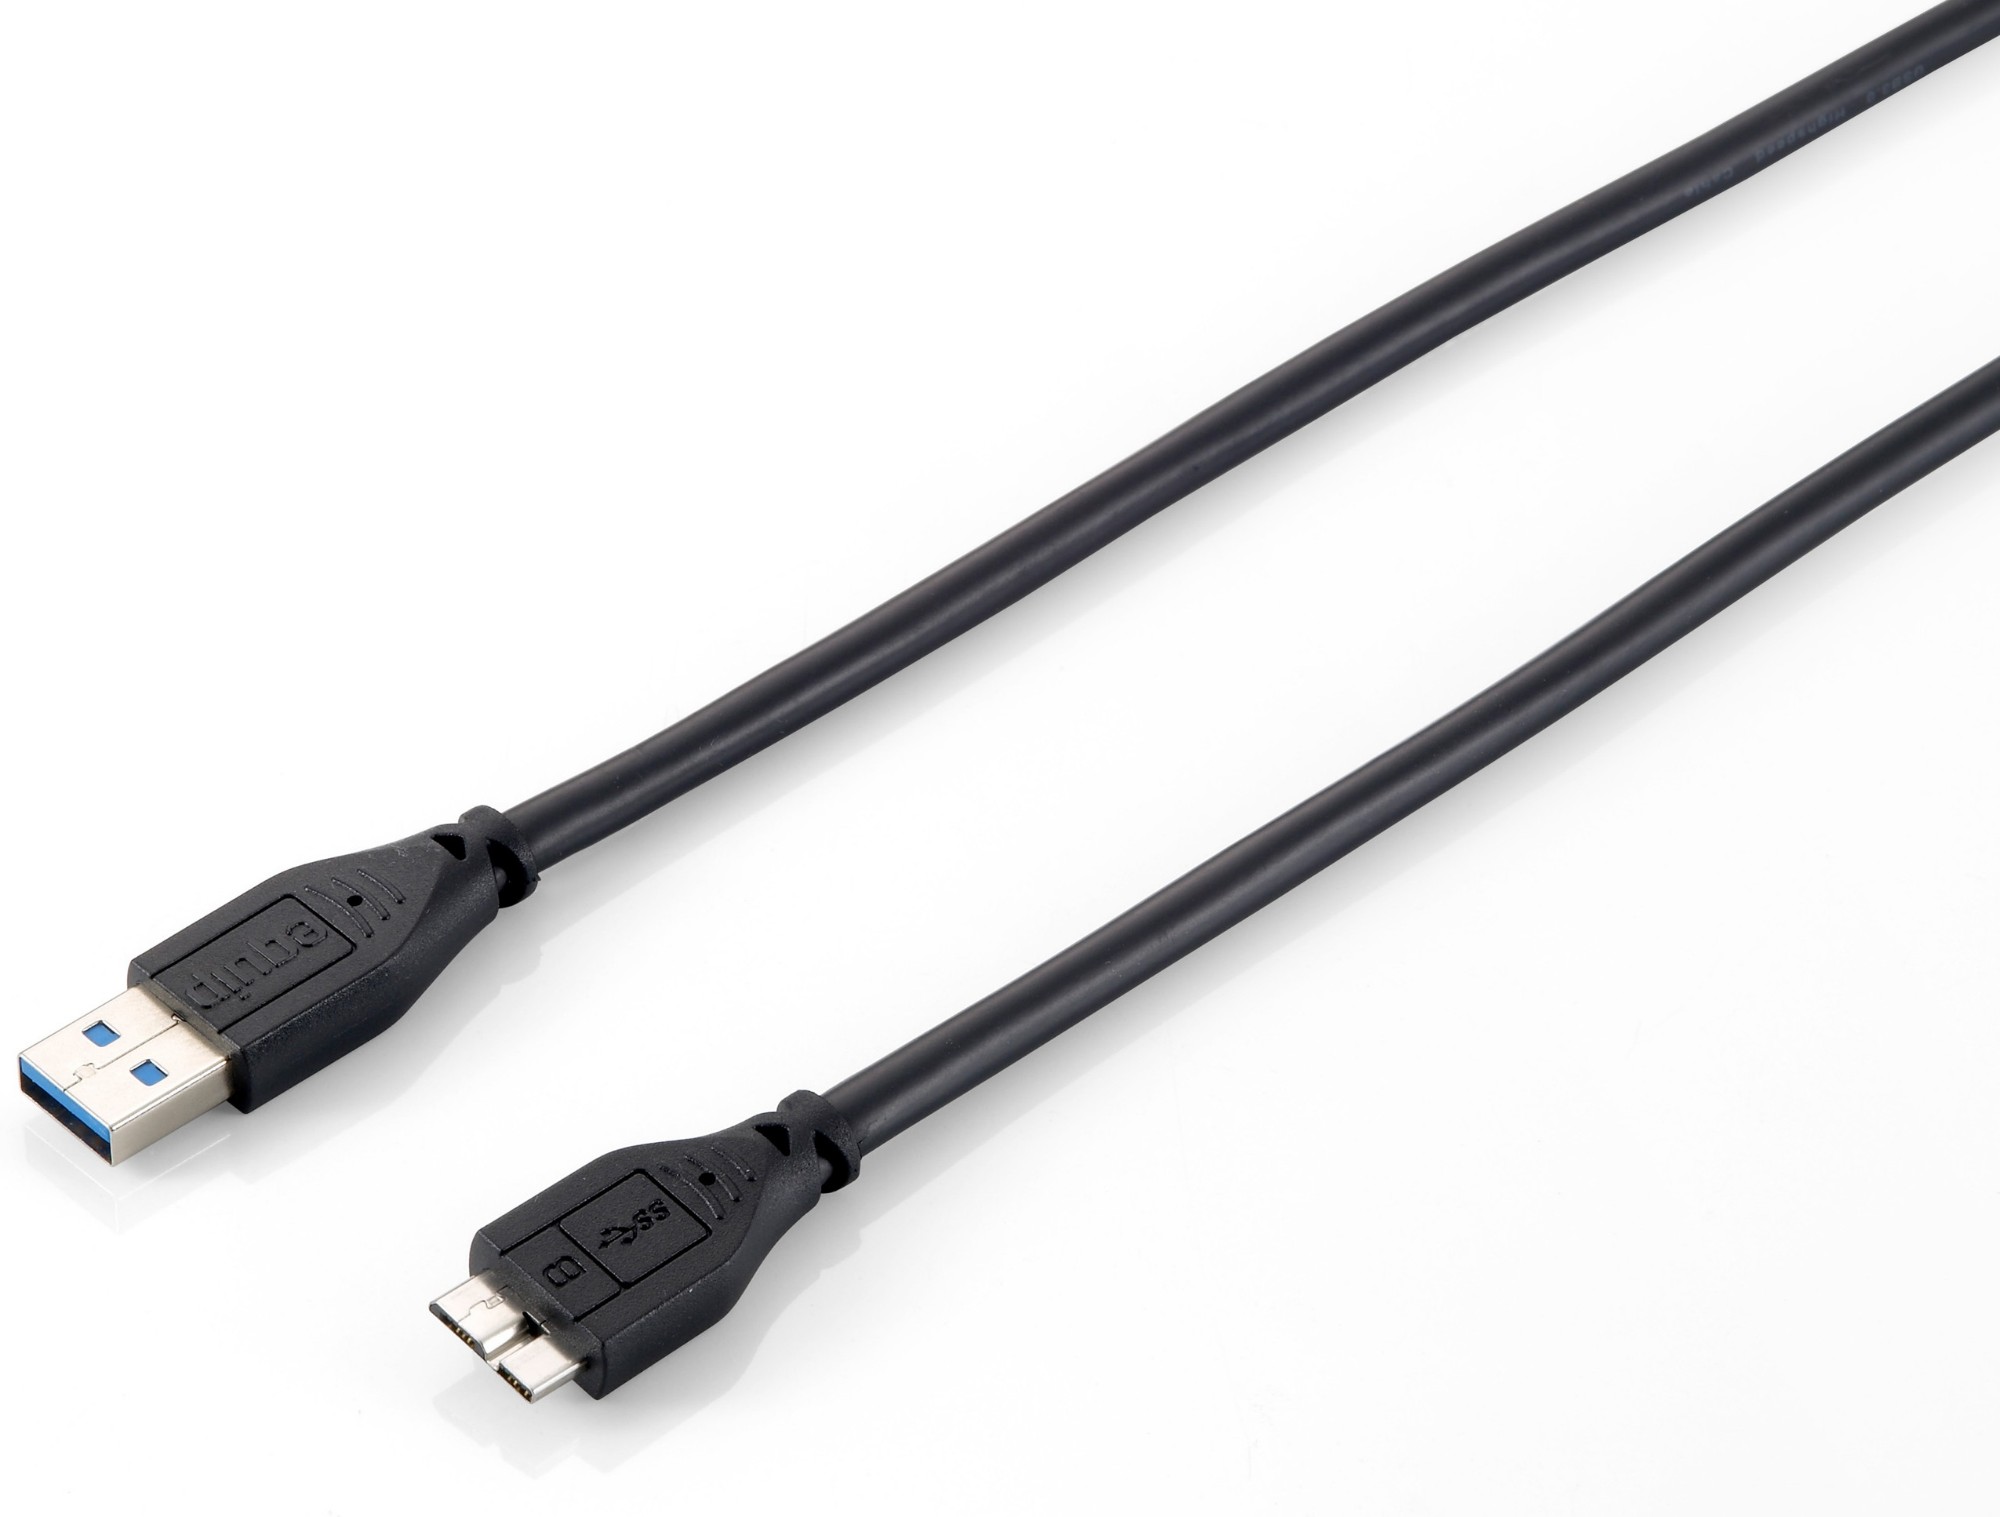 Photos - Cable (video, audio, USB) Equip USB 3.0 Type A to Micro-B Cable 128397 